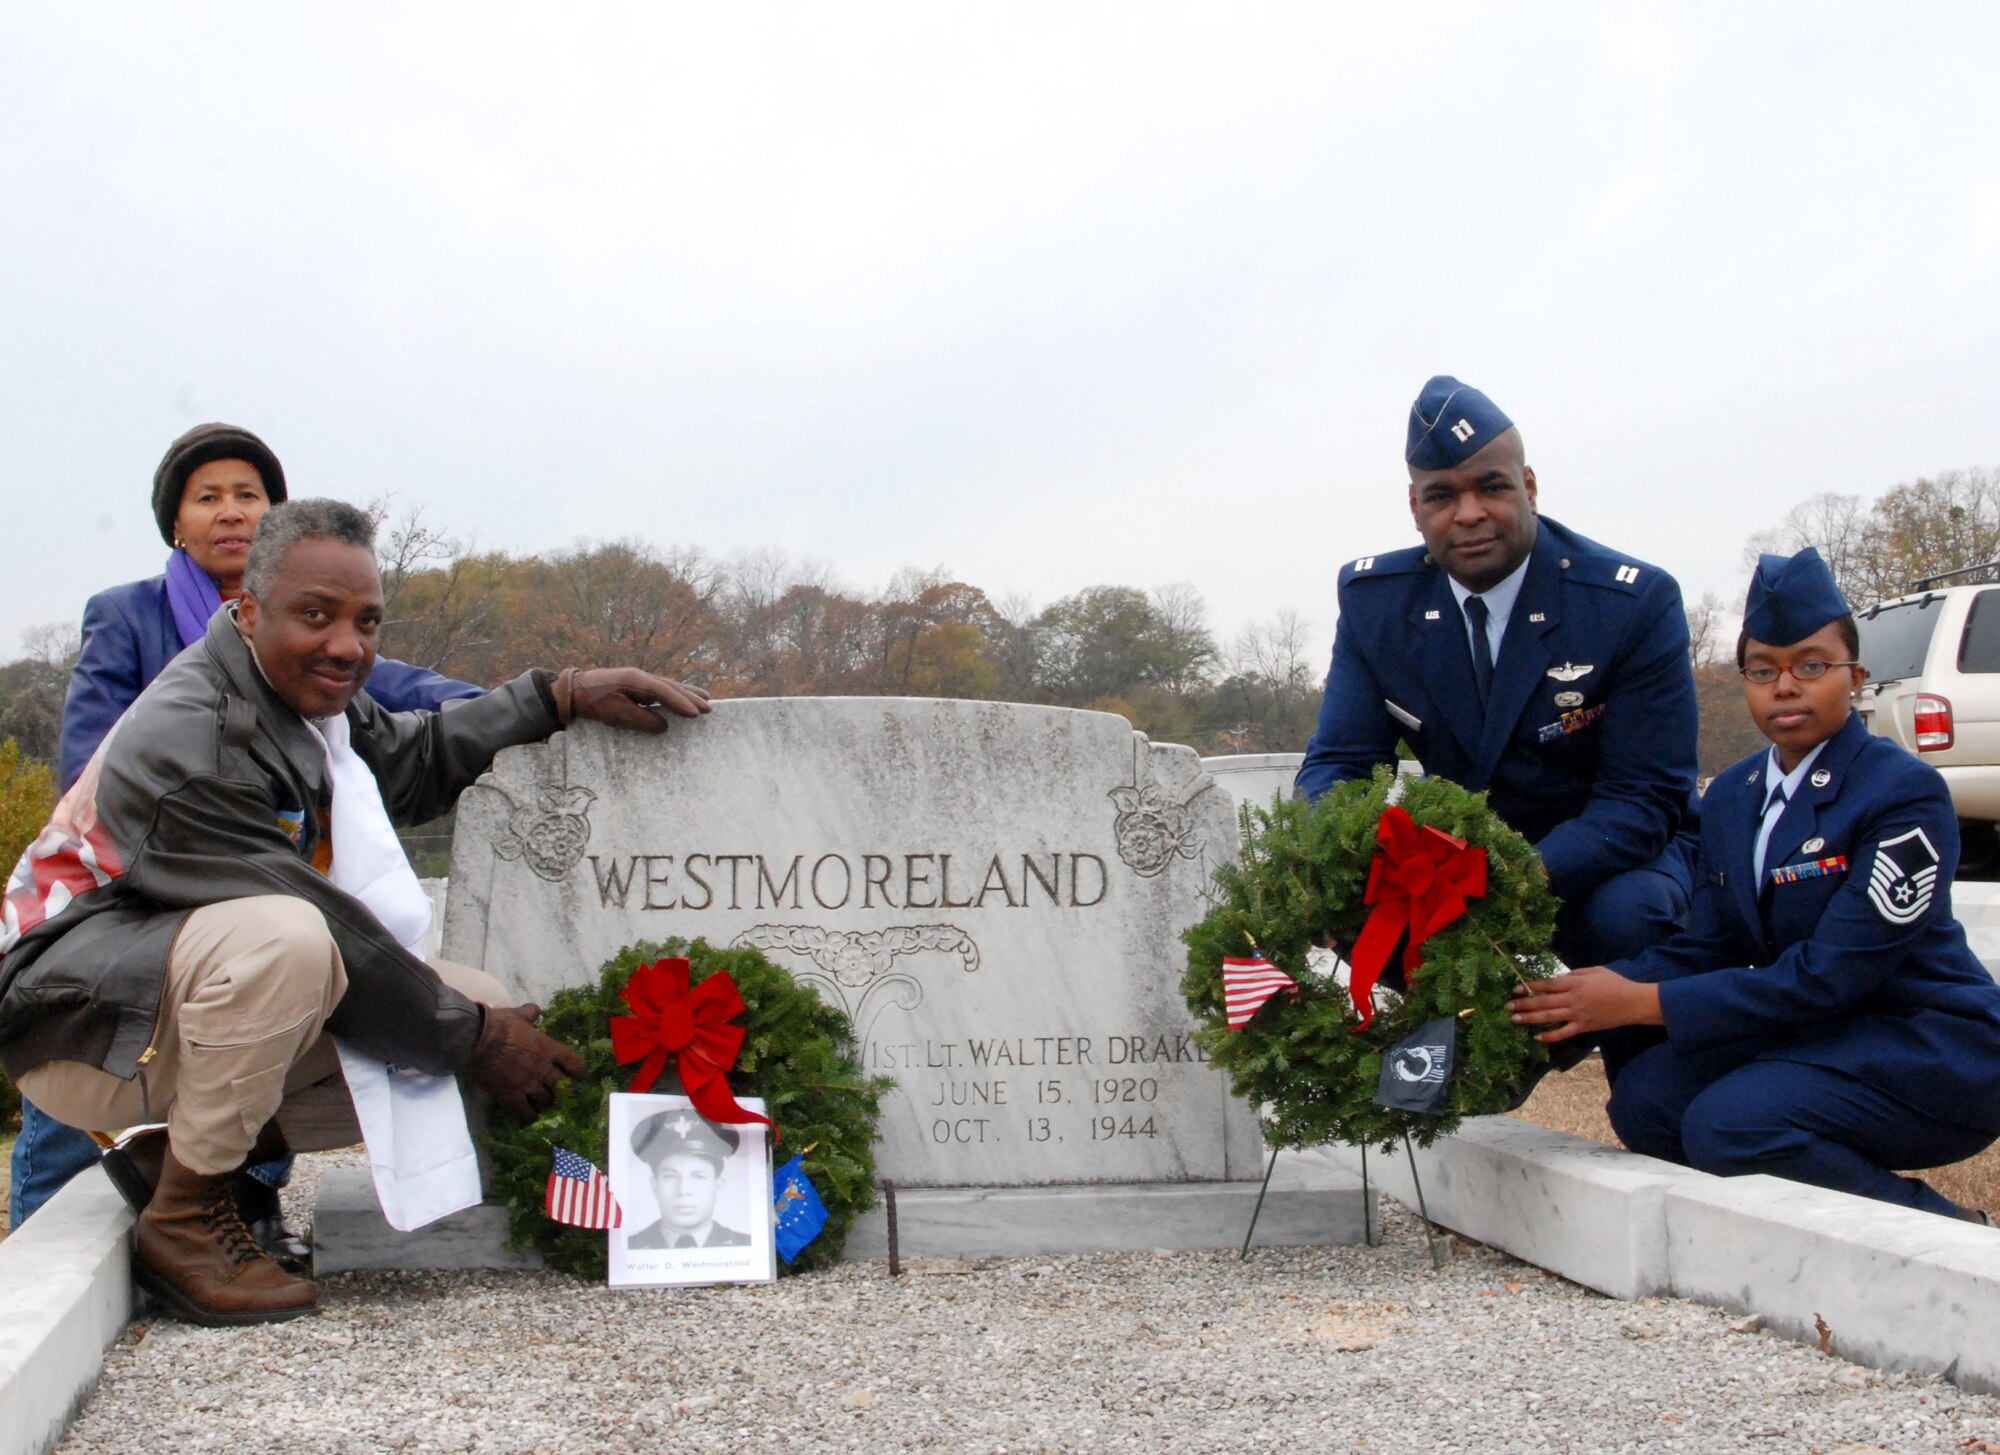 Master Sgt. Michael Varnado, 94th Operations Support Squadron, dressed in a Tuskegee Airman pilot uniform, Ms. Zellie Orr, Tuskegee Airman historian,  Capt.  Darrell Bogan, 94th Equal Opportunity officer, and Master Sgt. Tracy Bridges, 94th OSS intelligence applications NCO, present ceremonial wreaths at the gravesite of 1st Lt. Walter D. Westmoreland—a Tuskegee Airman pilot who was killed in combat during World War II.  All are members of the Atlanta Chapter Tuskegee Airman,  Inc.    The photo of Lieutenant Westmoreland and Tuskegee Airman historical information was provided by Ms. Orr. (U.S. Air Force photo/Master Sgt. Stan Coleman)